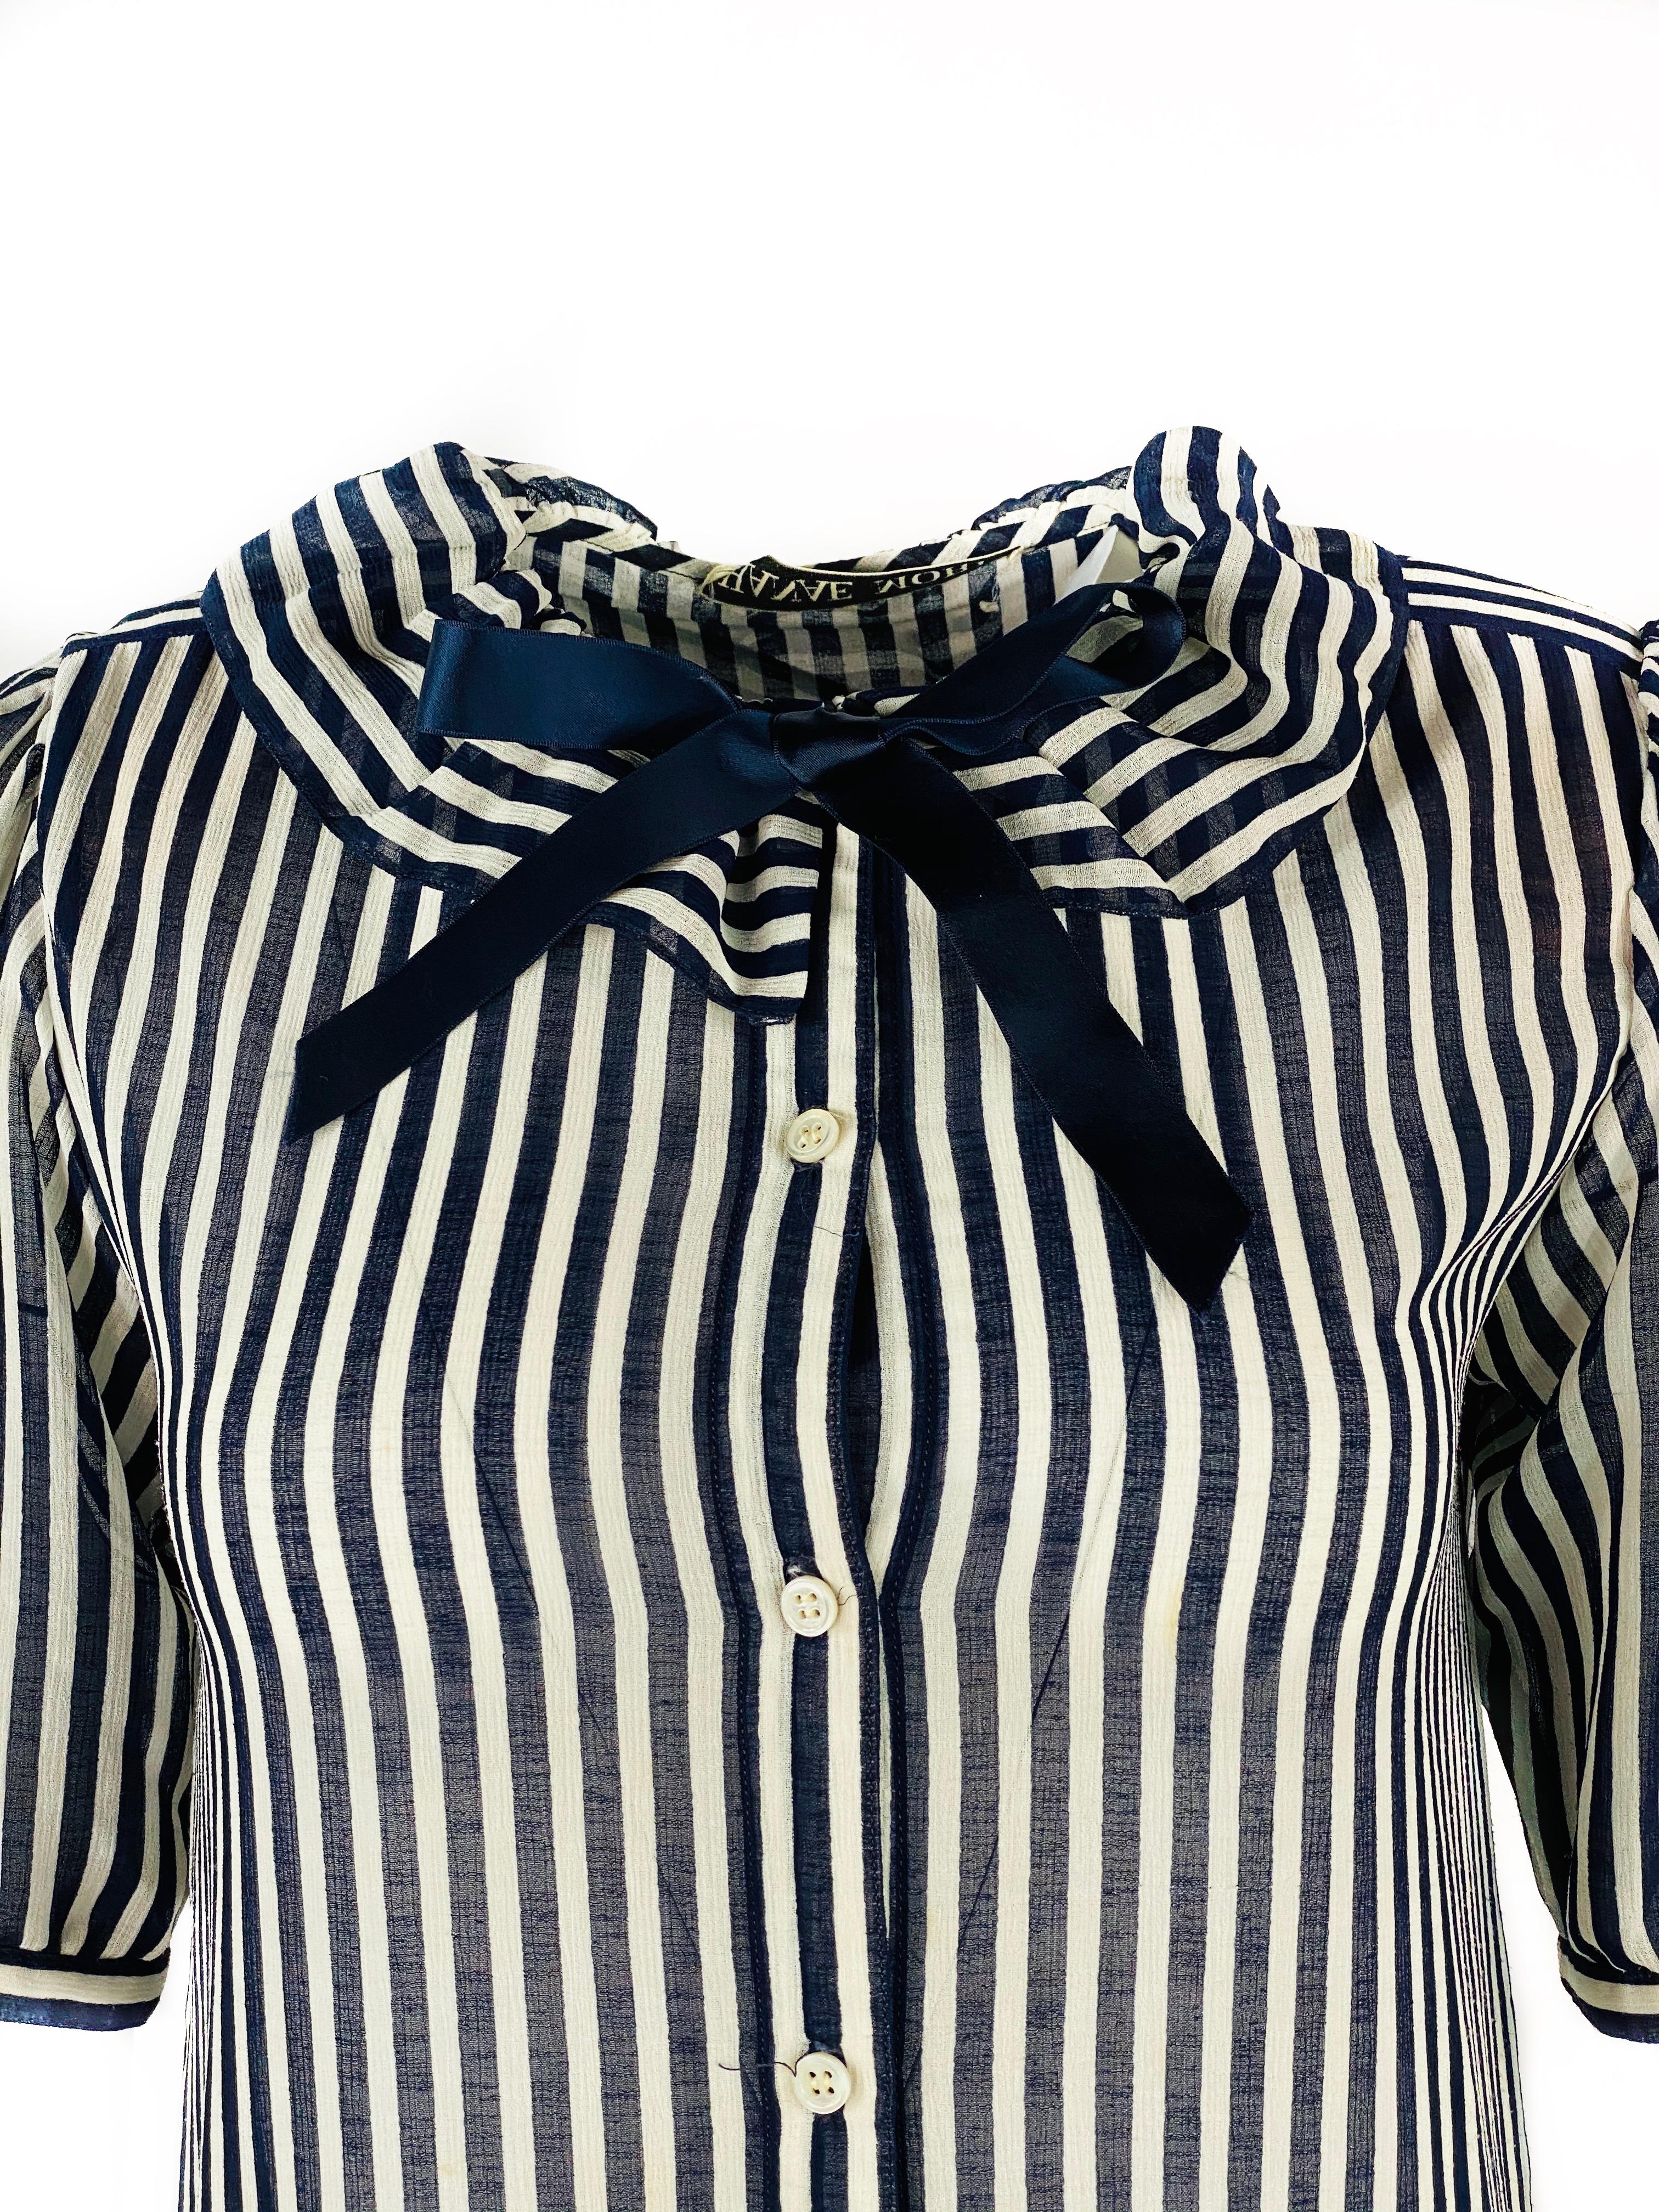 HANAE MORI Navy and White Striped Short Sleeve Midi Dress w/ Bow Size US 8

Product details:
Size 8
100% Polyester 
Short sleeves 12.5” long
Four front button and one hook front closure
One button rare closure on each sleeve
Featuring navy bow